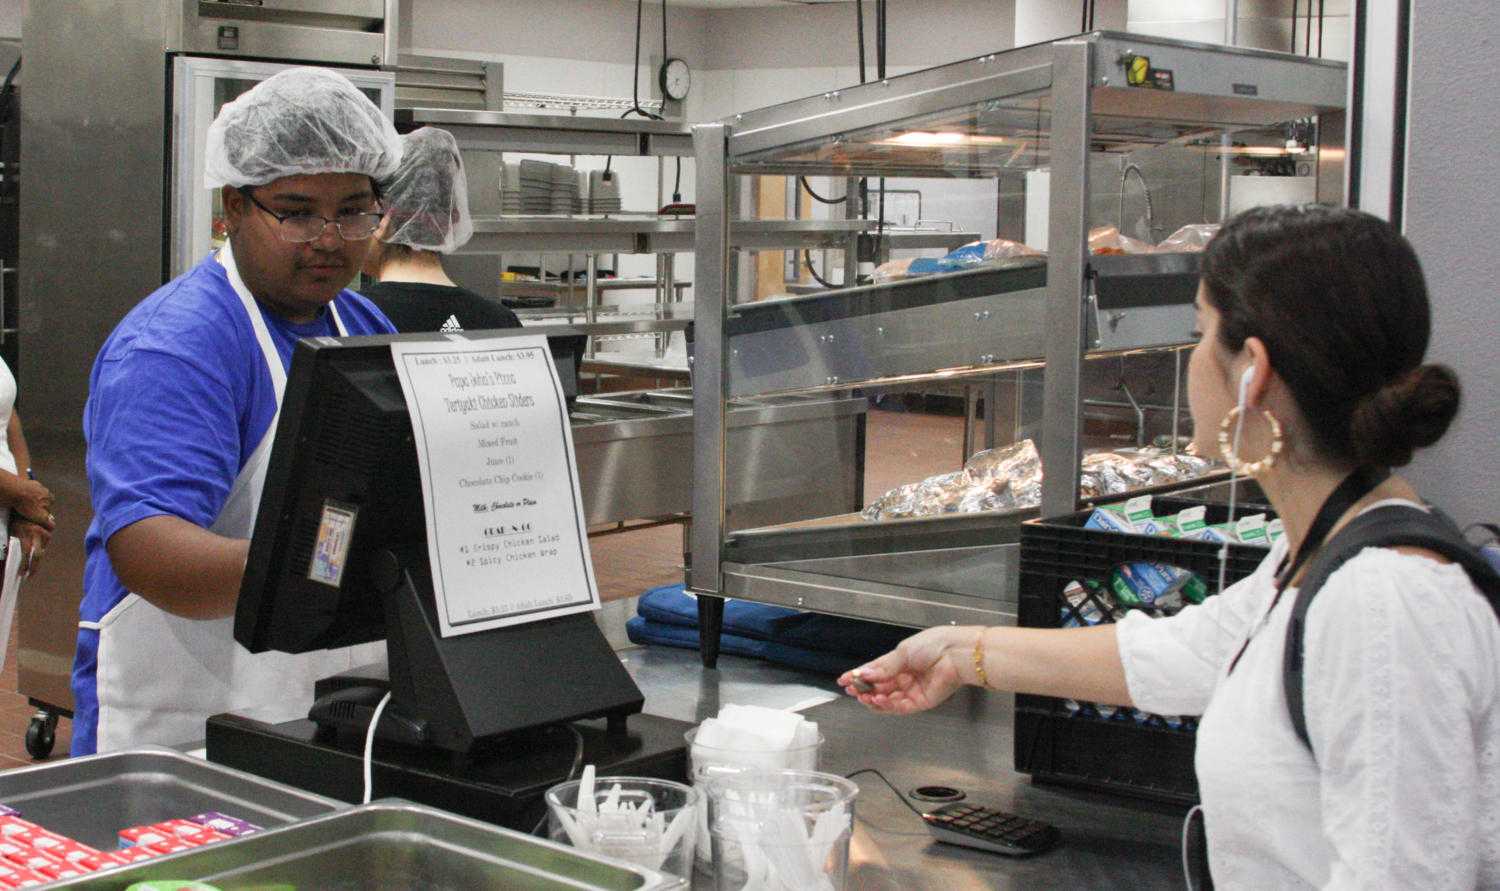 New cafeteria app launches, additional features in development